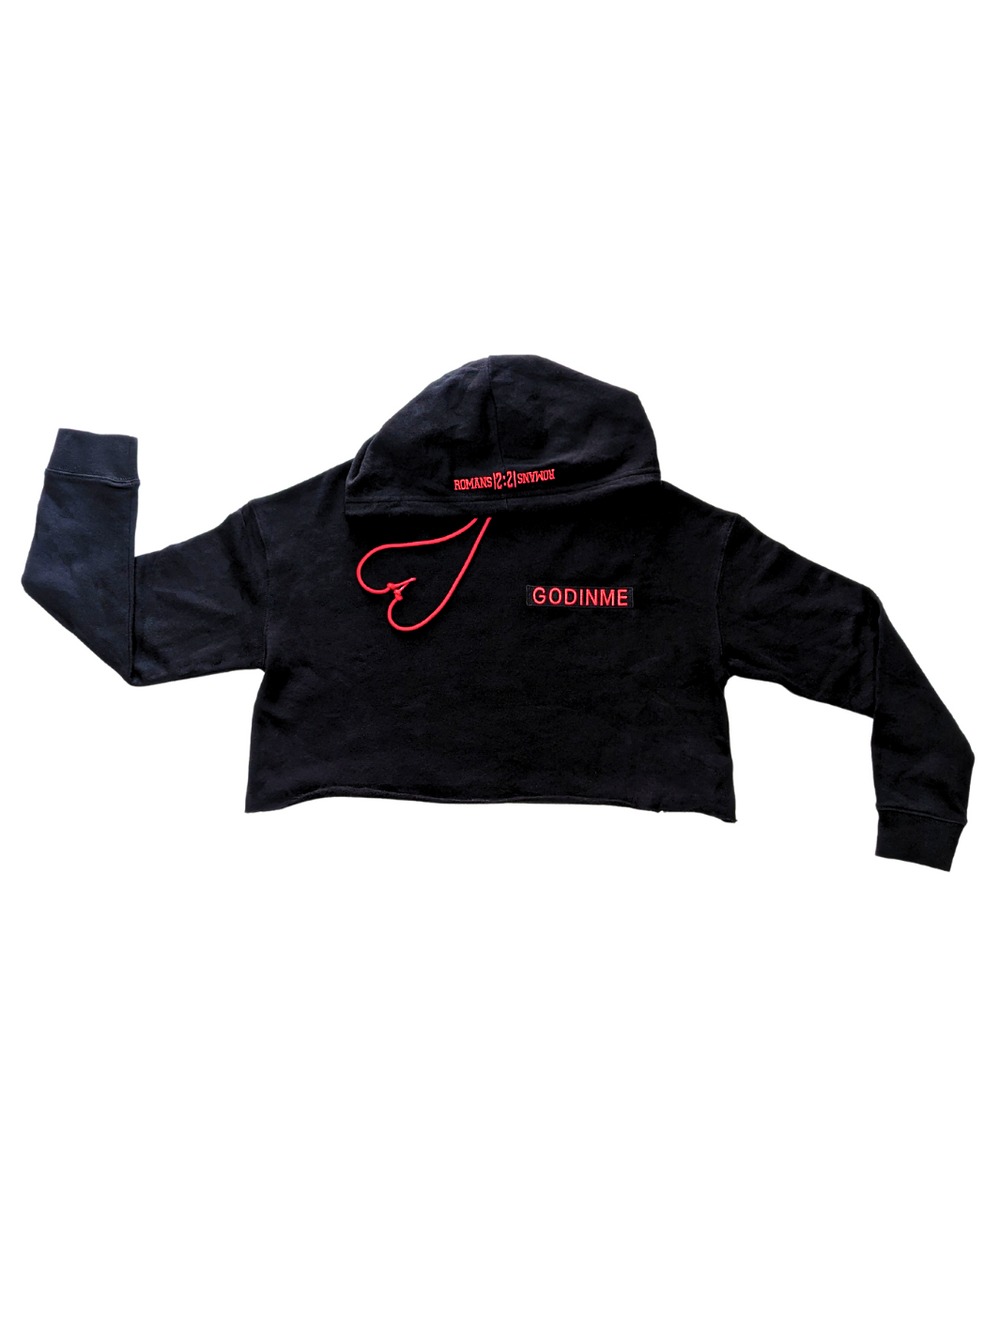 Black crop top hoodie, Exclusive Collection, Red GODinme nameplate, Romans 12 : 21 on hood  